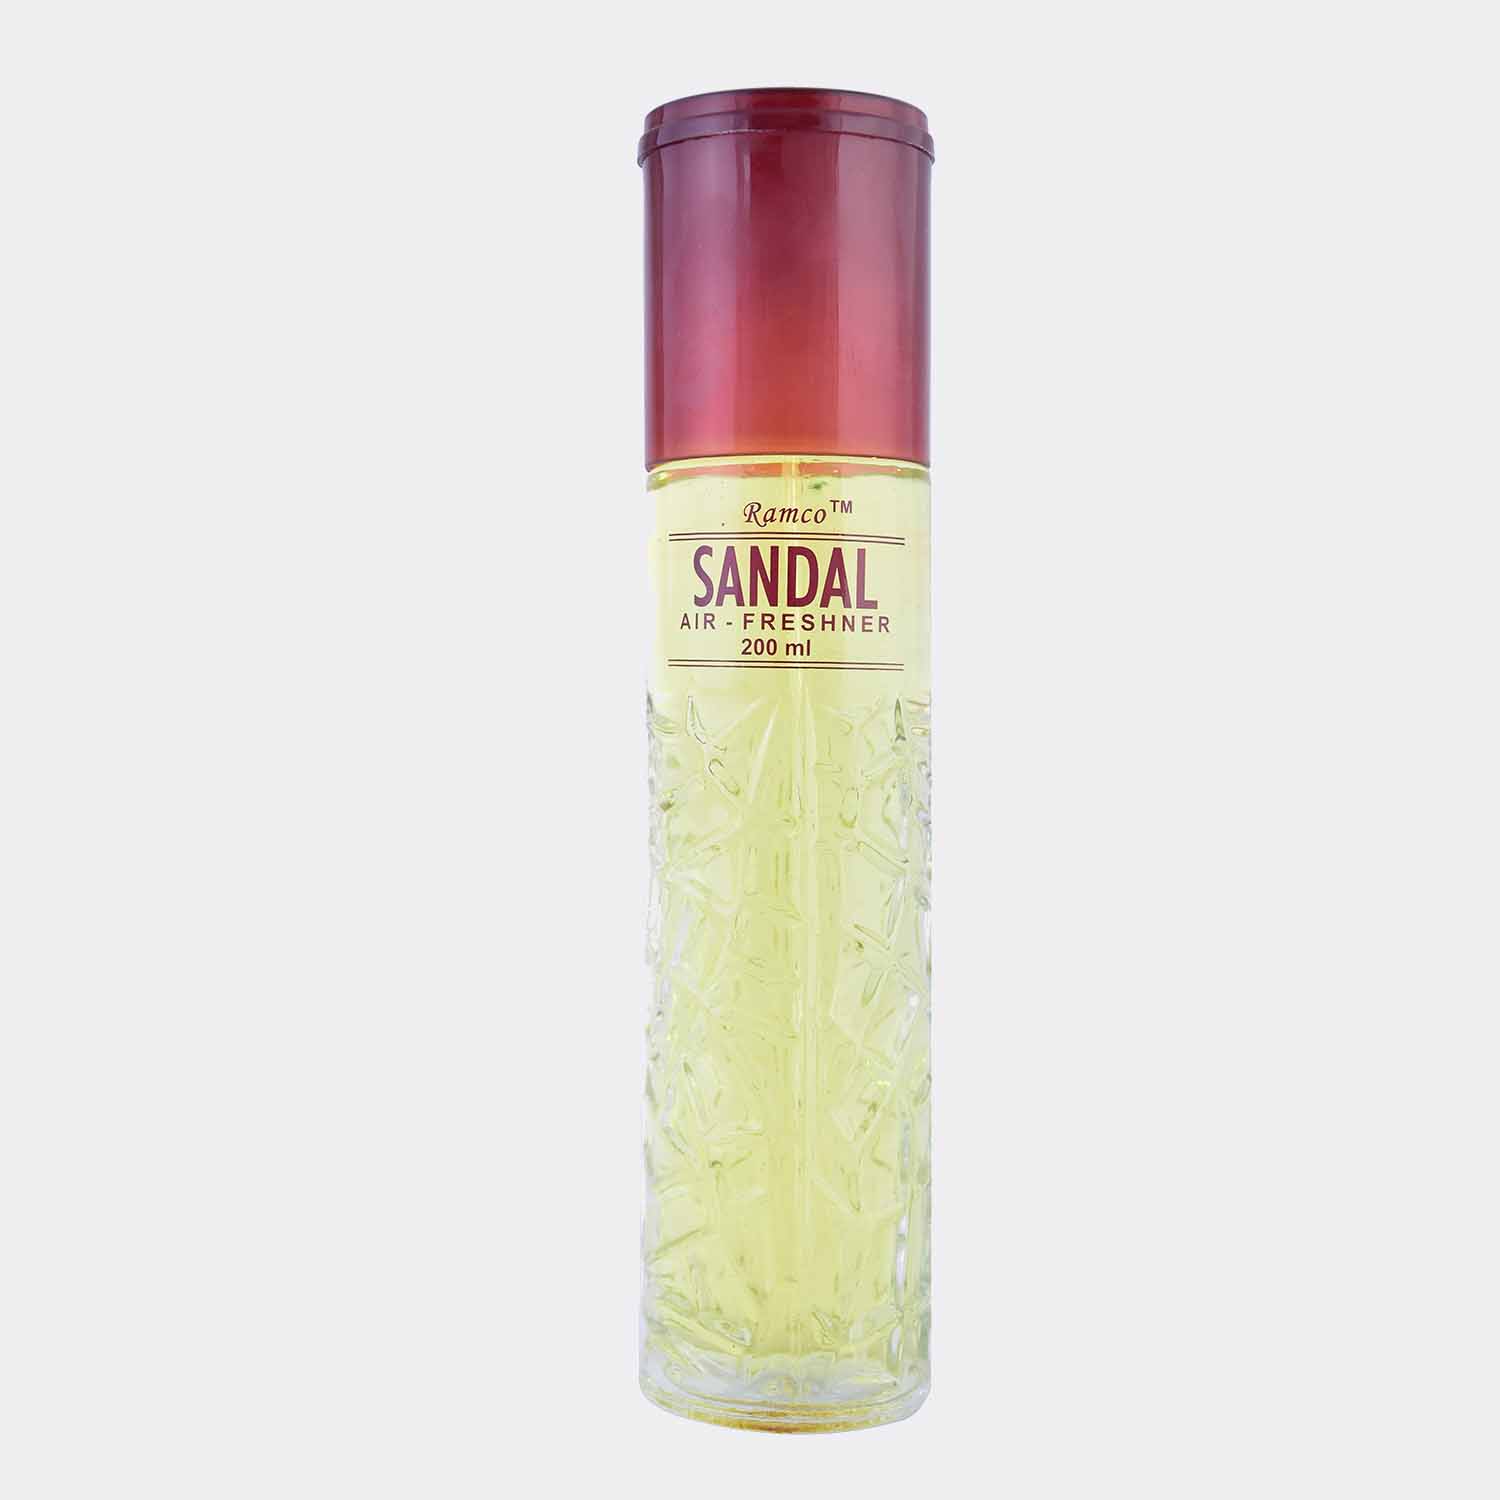 10 oud fragrances that are warm and seductive to add to your beauty shelf |  Vogue India